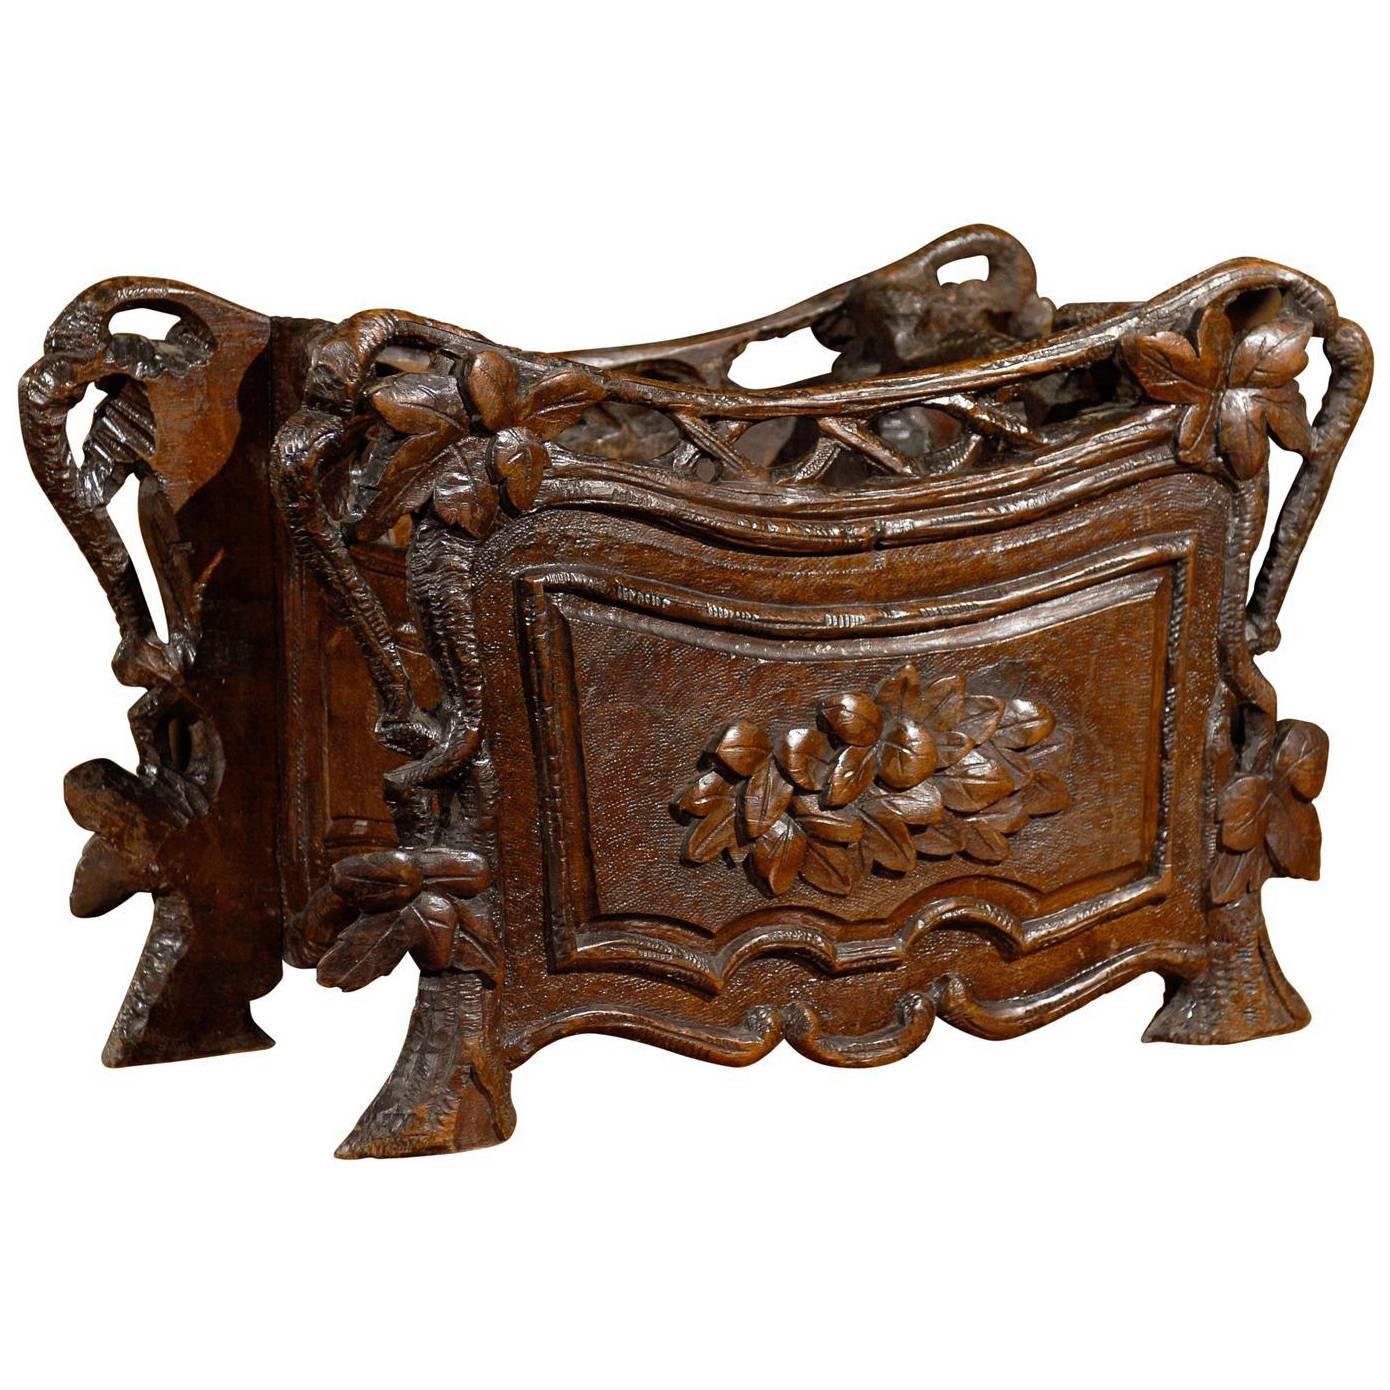 Black Forest Swiss Carved Oak Planter or Jardinière from the Late 19th Century